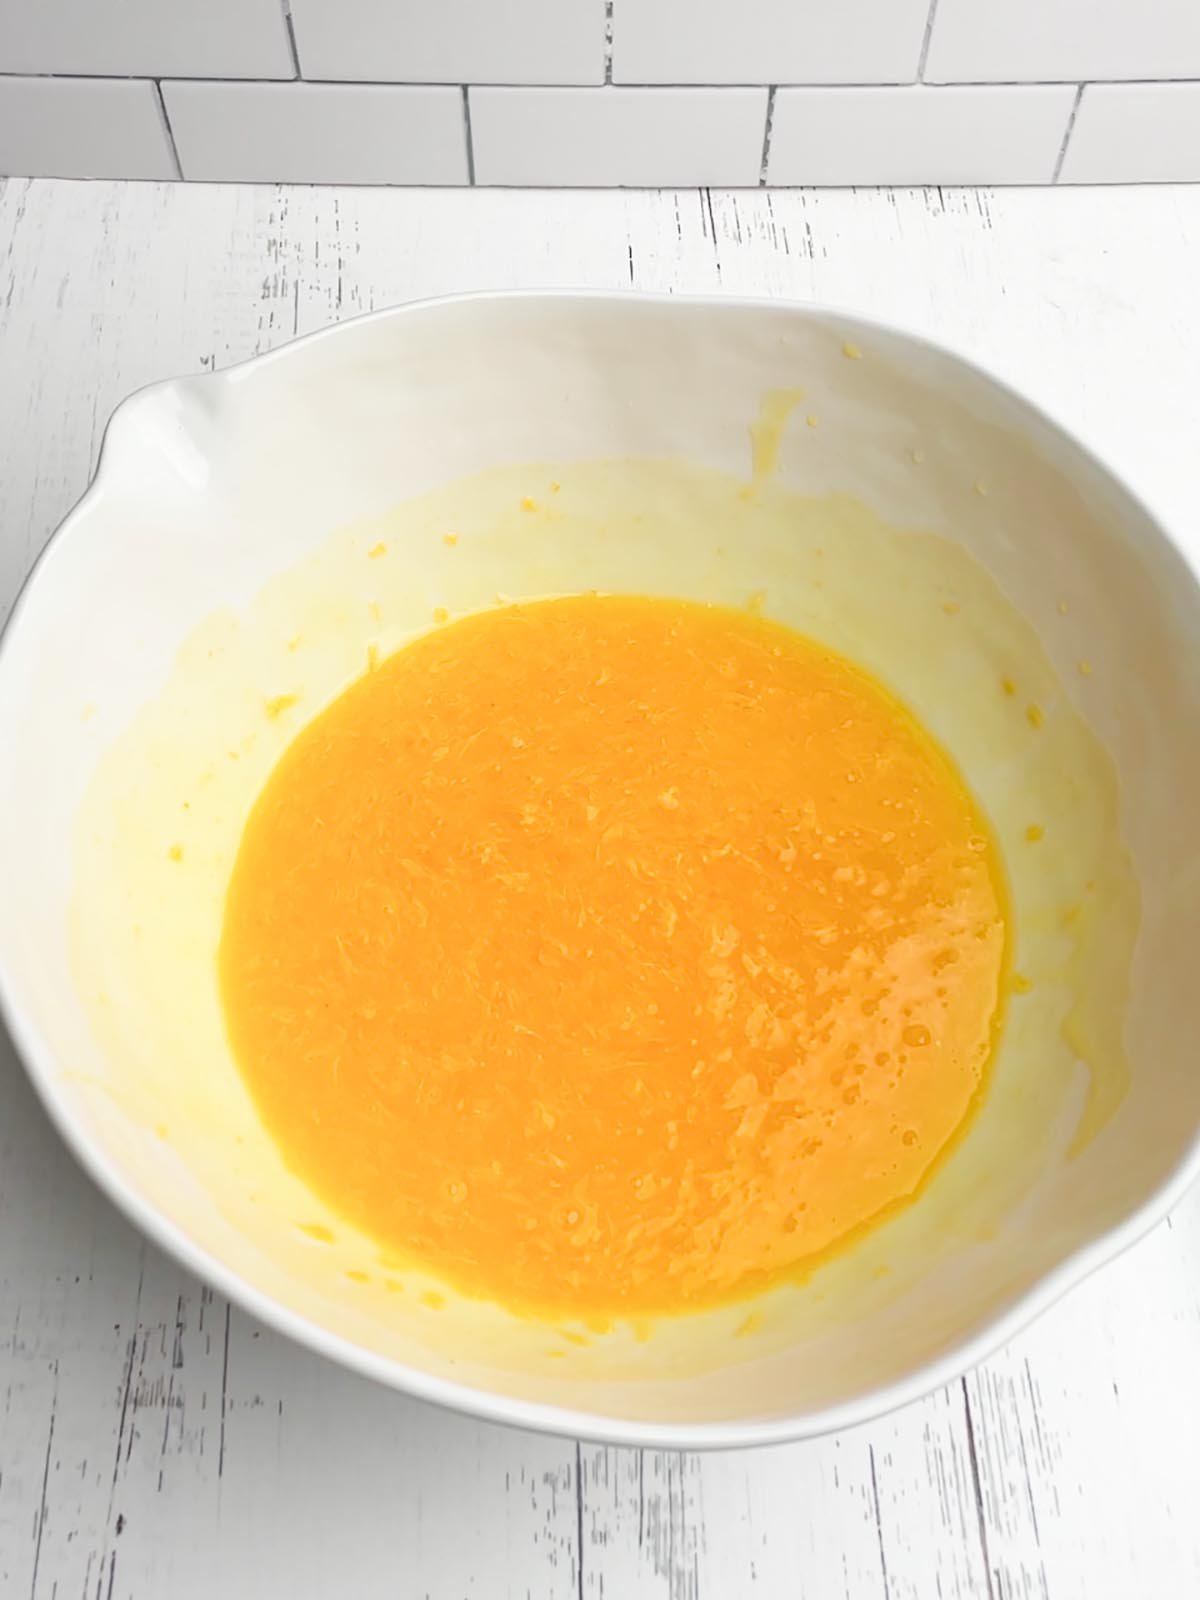 oranges and pudding mix in a white mixing bowl